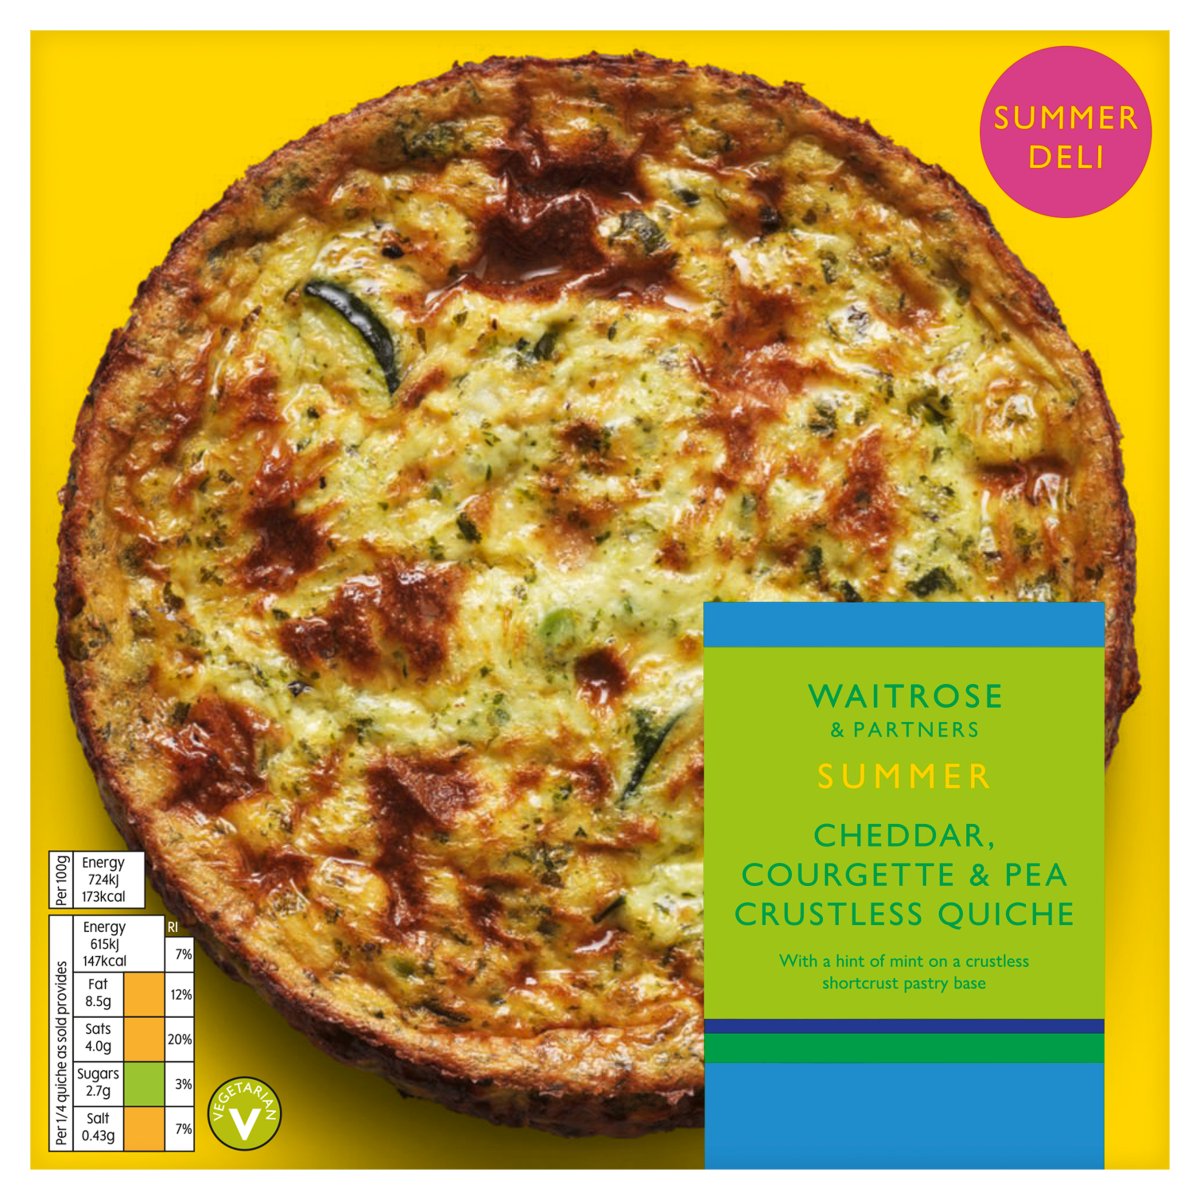 Take a look at these tasty new quiches, available in Waitrose now. And even better, they are both available on a 2 for £5.50 picnic deal. #greatfood #makingeverydaytastebetter